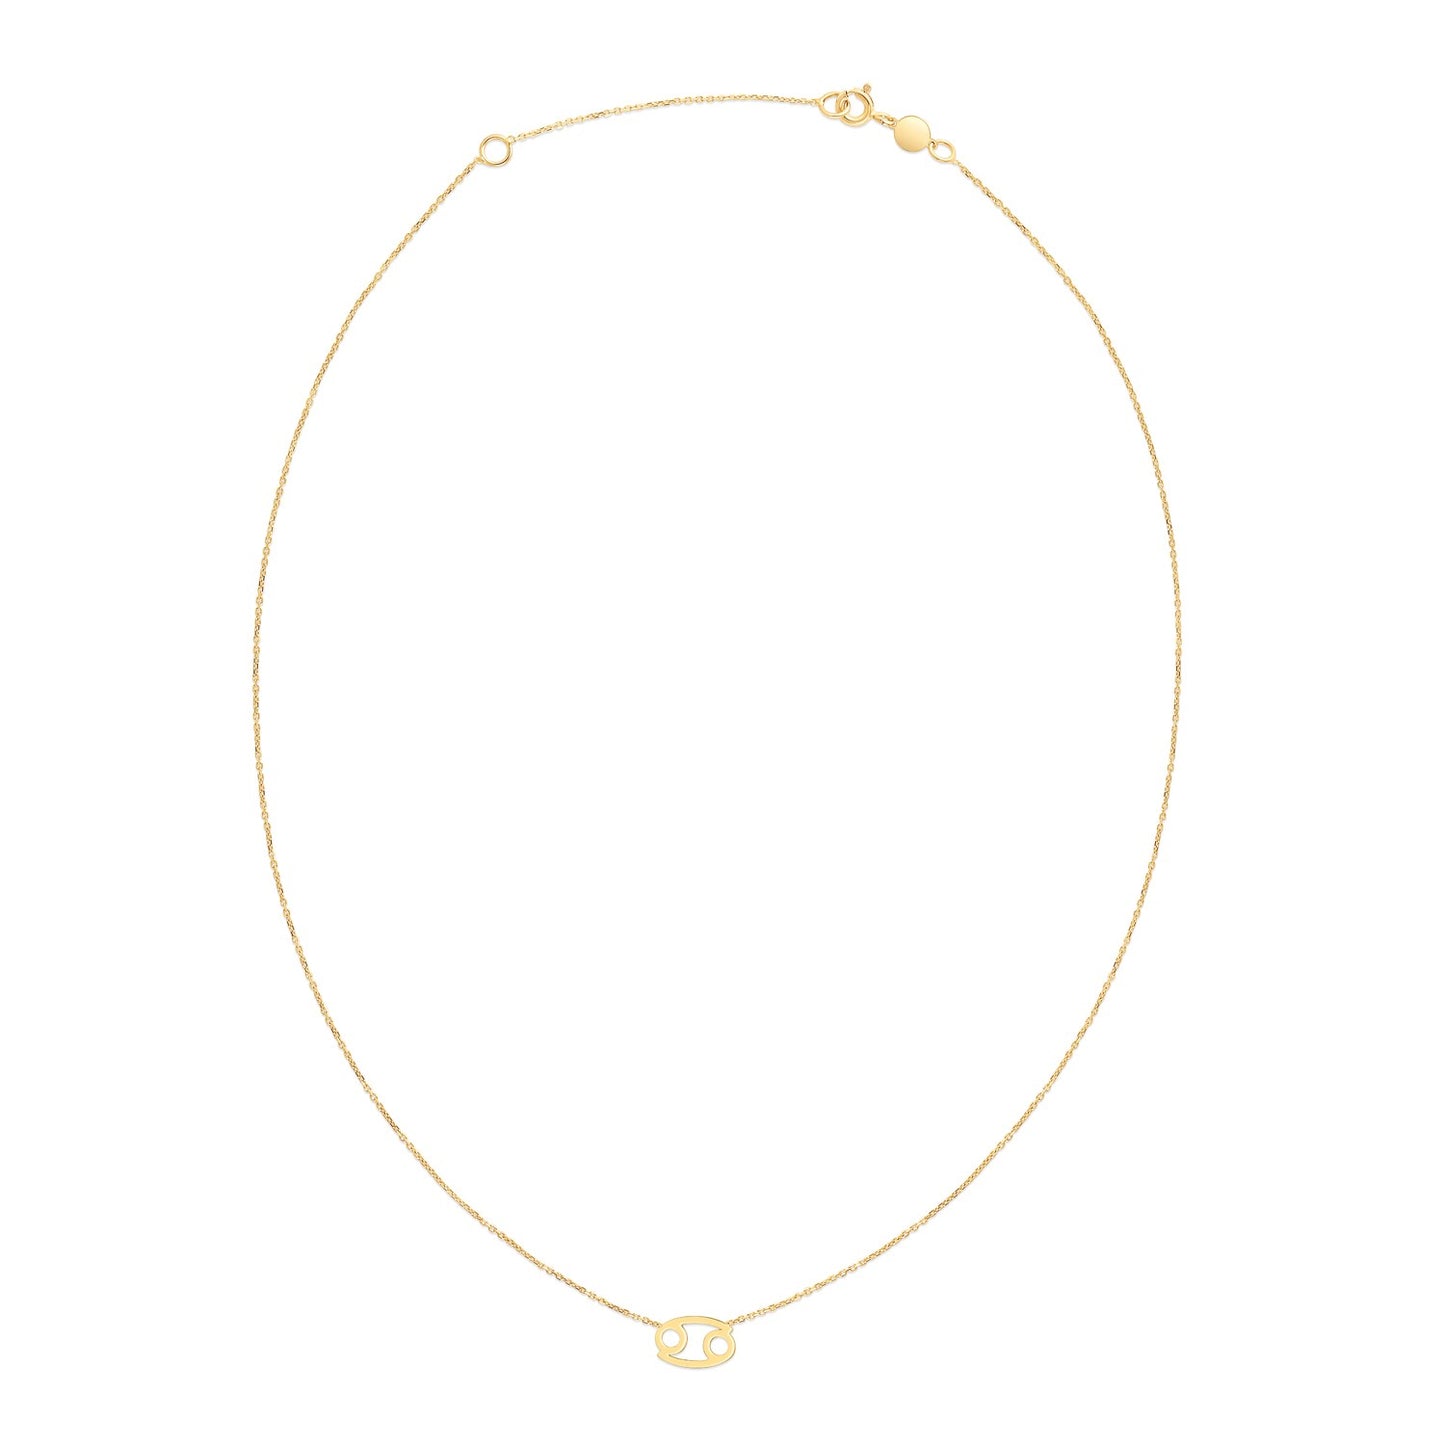 14K Yellow Gold Cancer Necklace